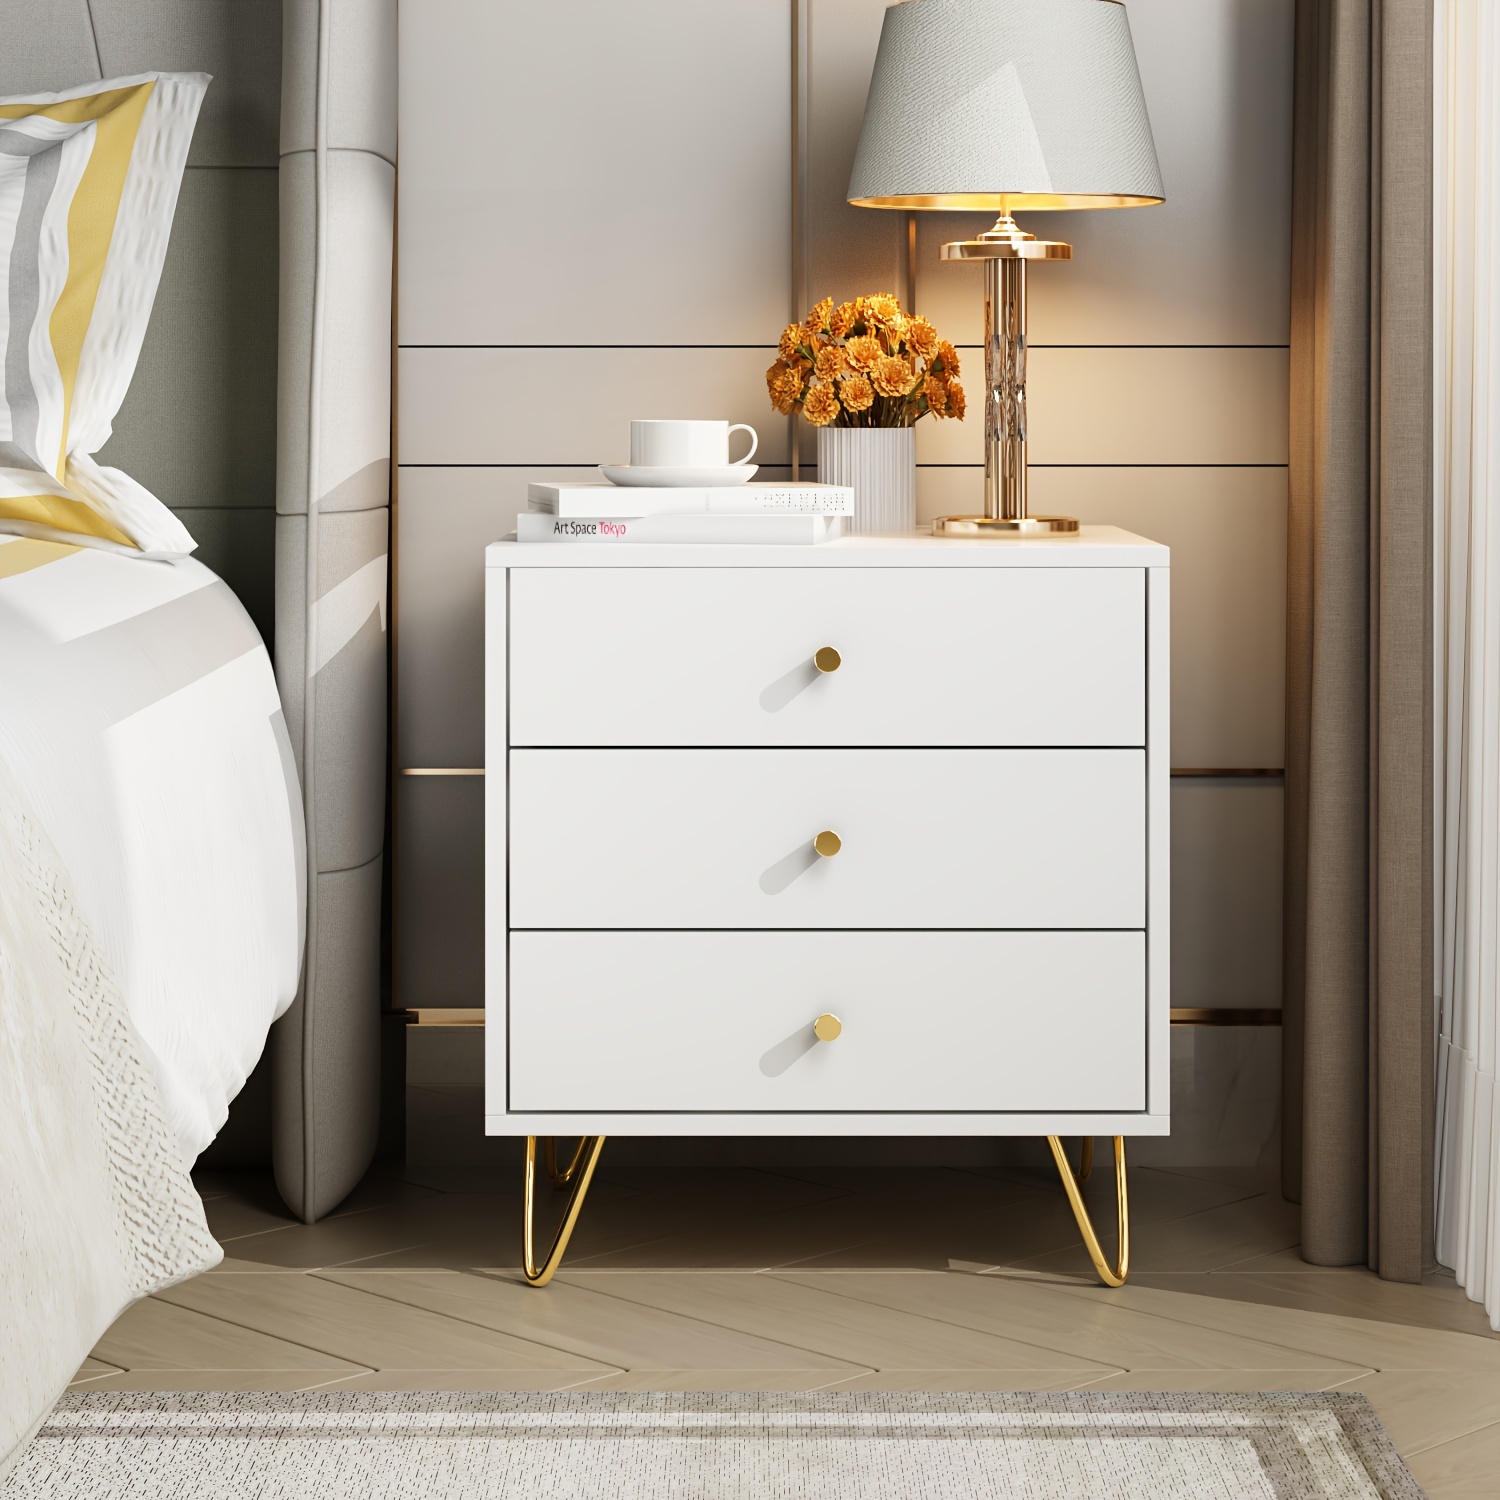 

1pc White Nightstand With Gold Accents, 2 Spacious Drawers And Open Shelves - Perfect For Modern Bedroom Decor (21.6" H X 19.7" W X 15.7" D)